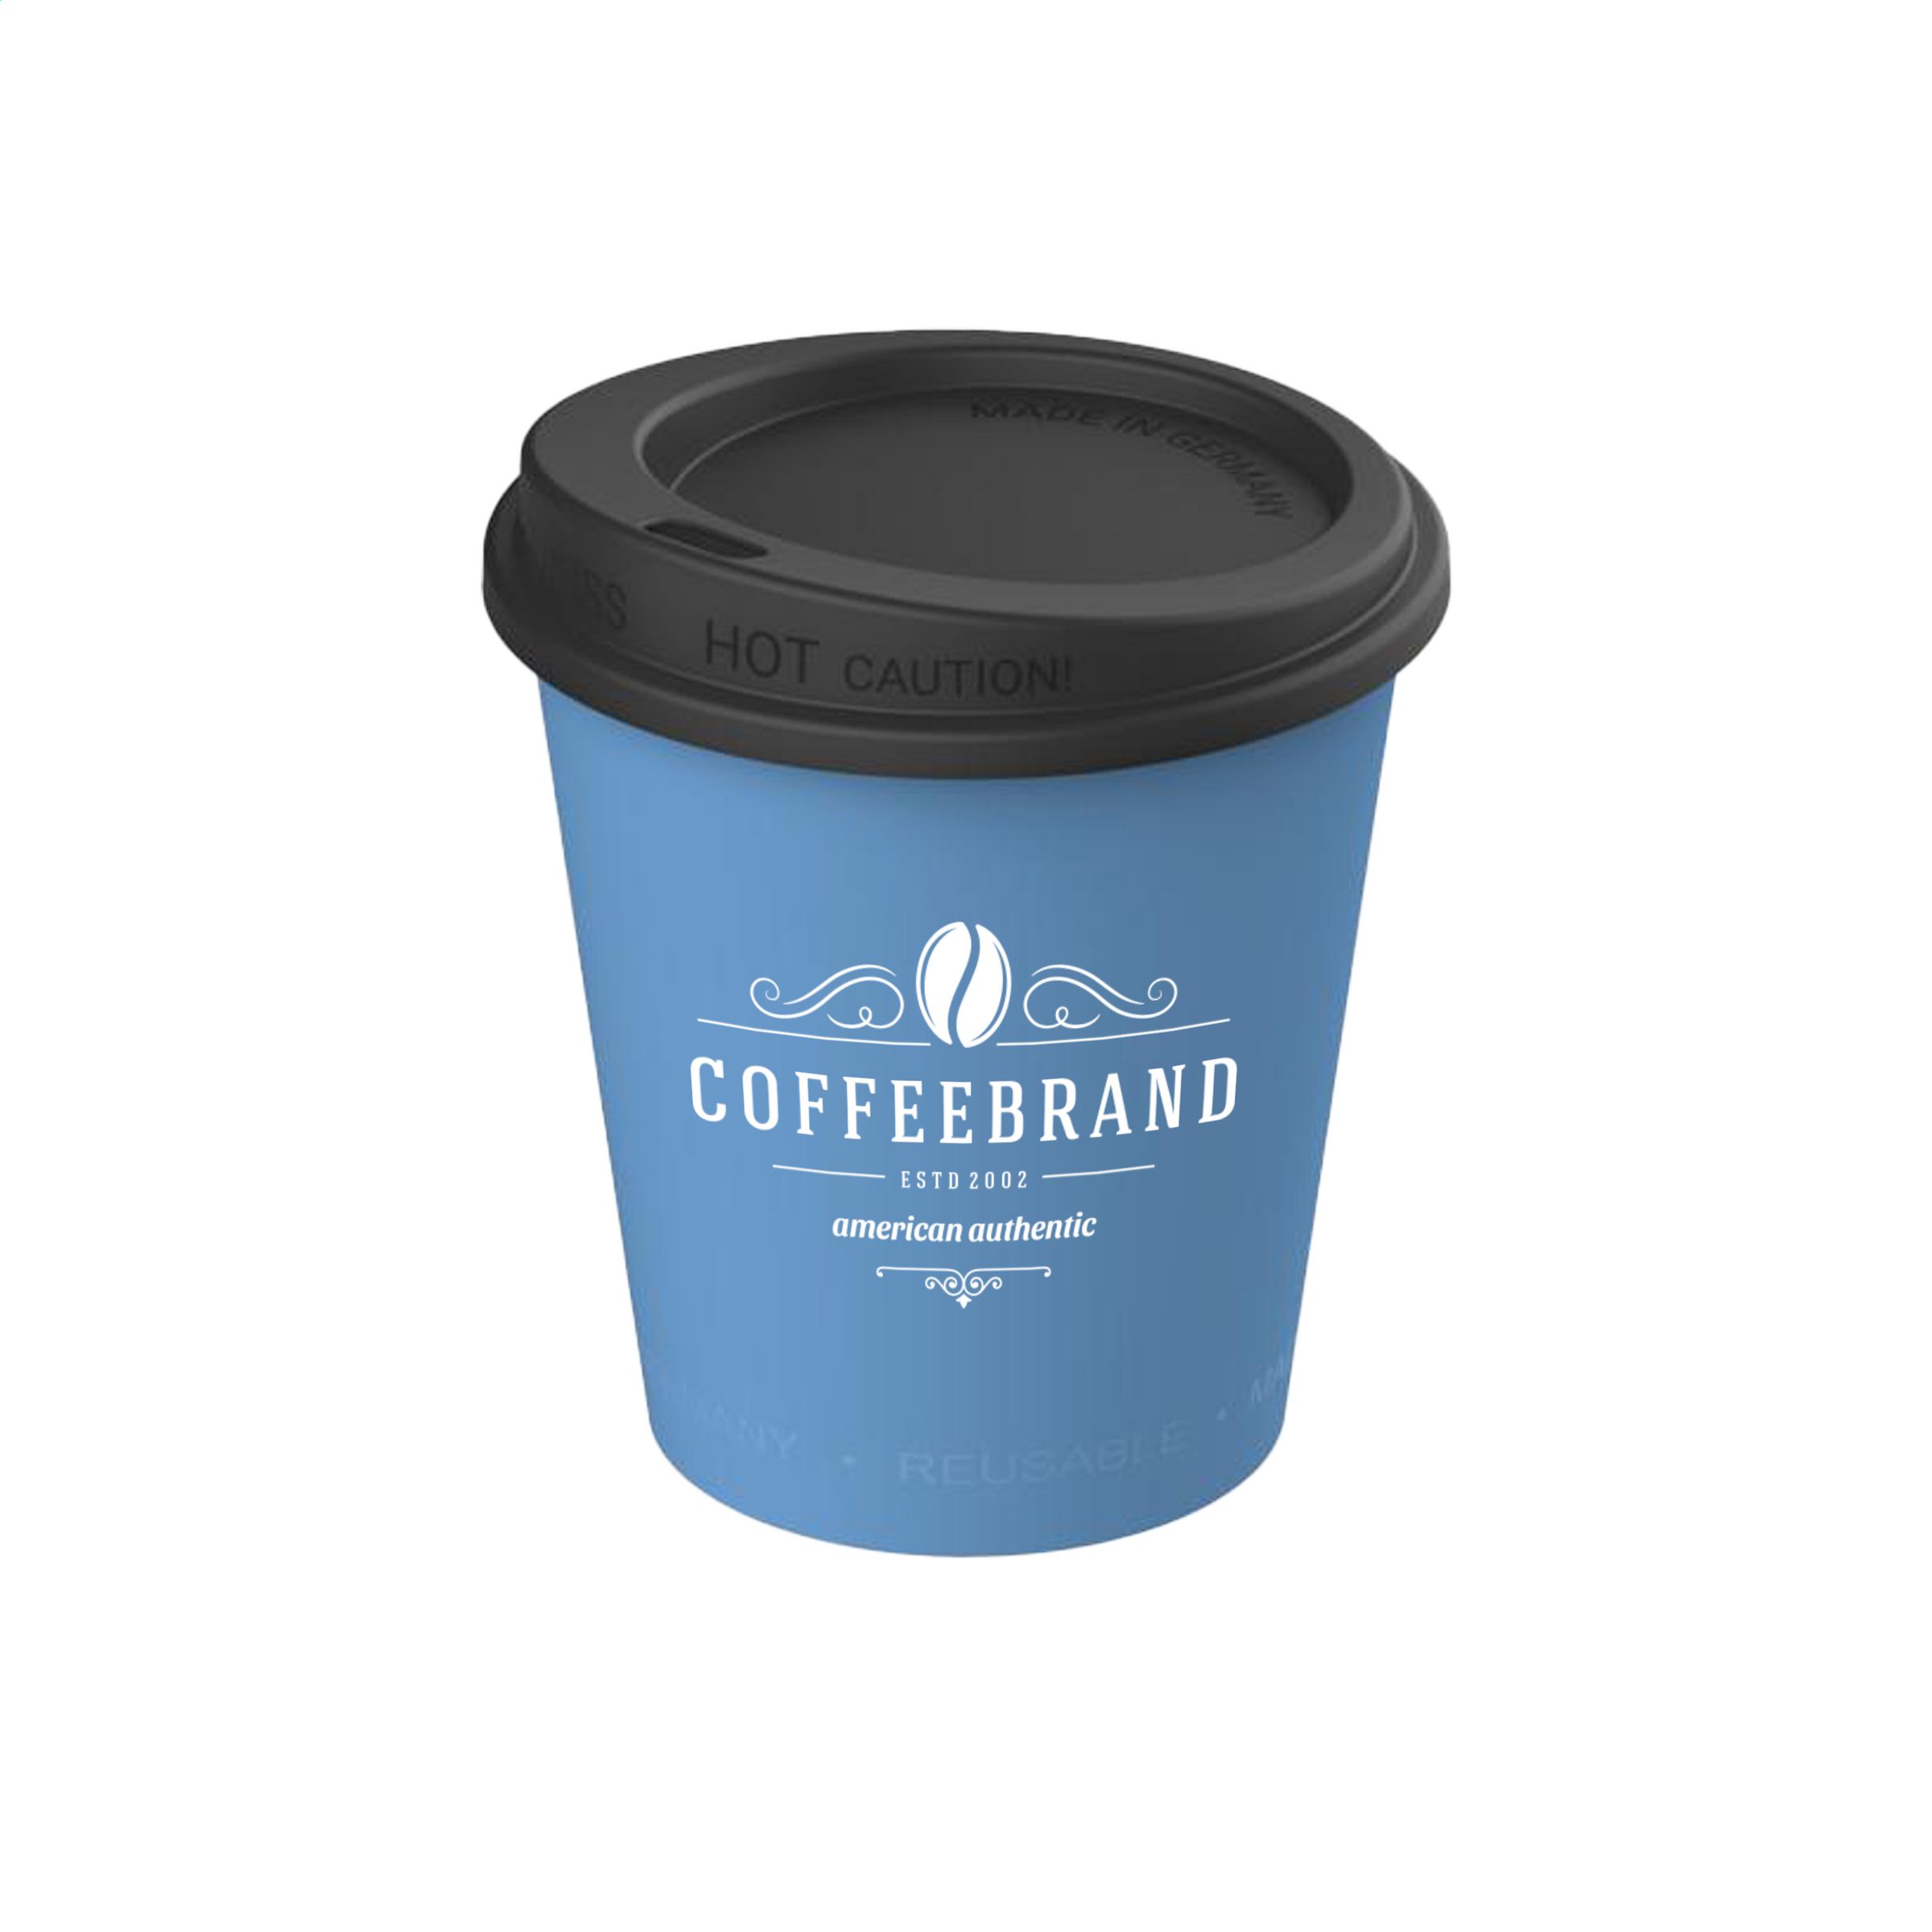 A coffee cup made of plastic that can be used multiple times - East Budleigh